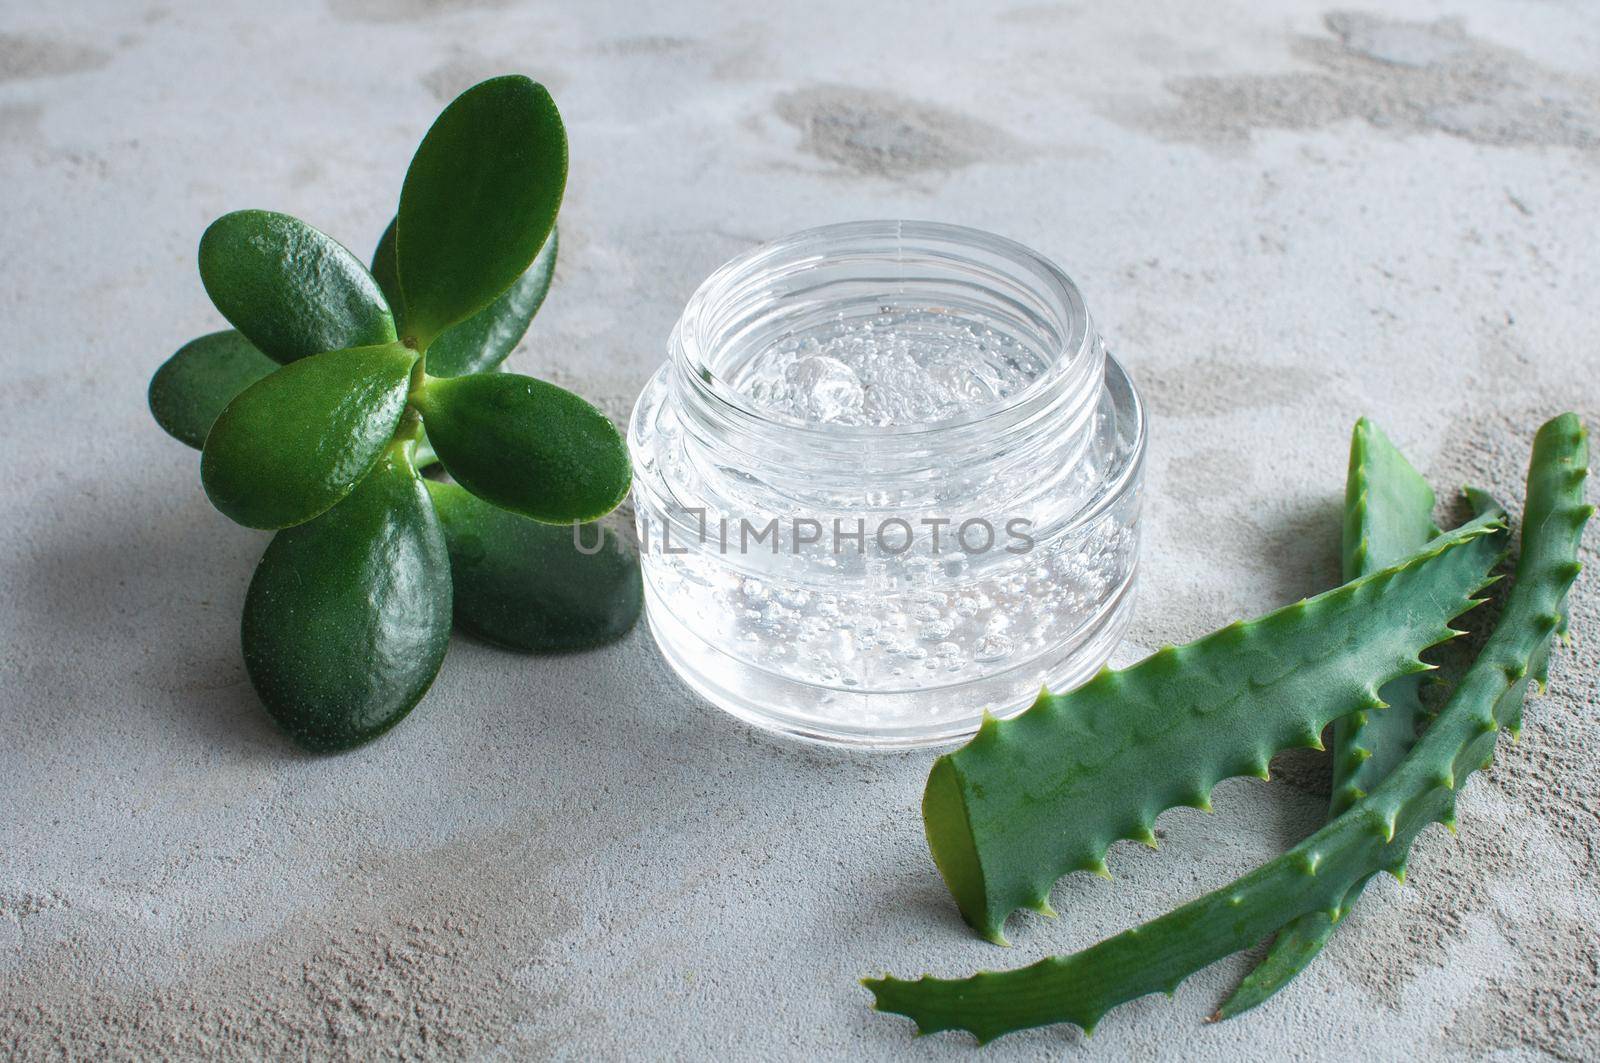 Gel texture with bubbles hyaluronic acid and aloe vera branches in a glass jar on a concrete background